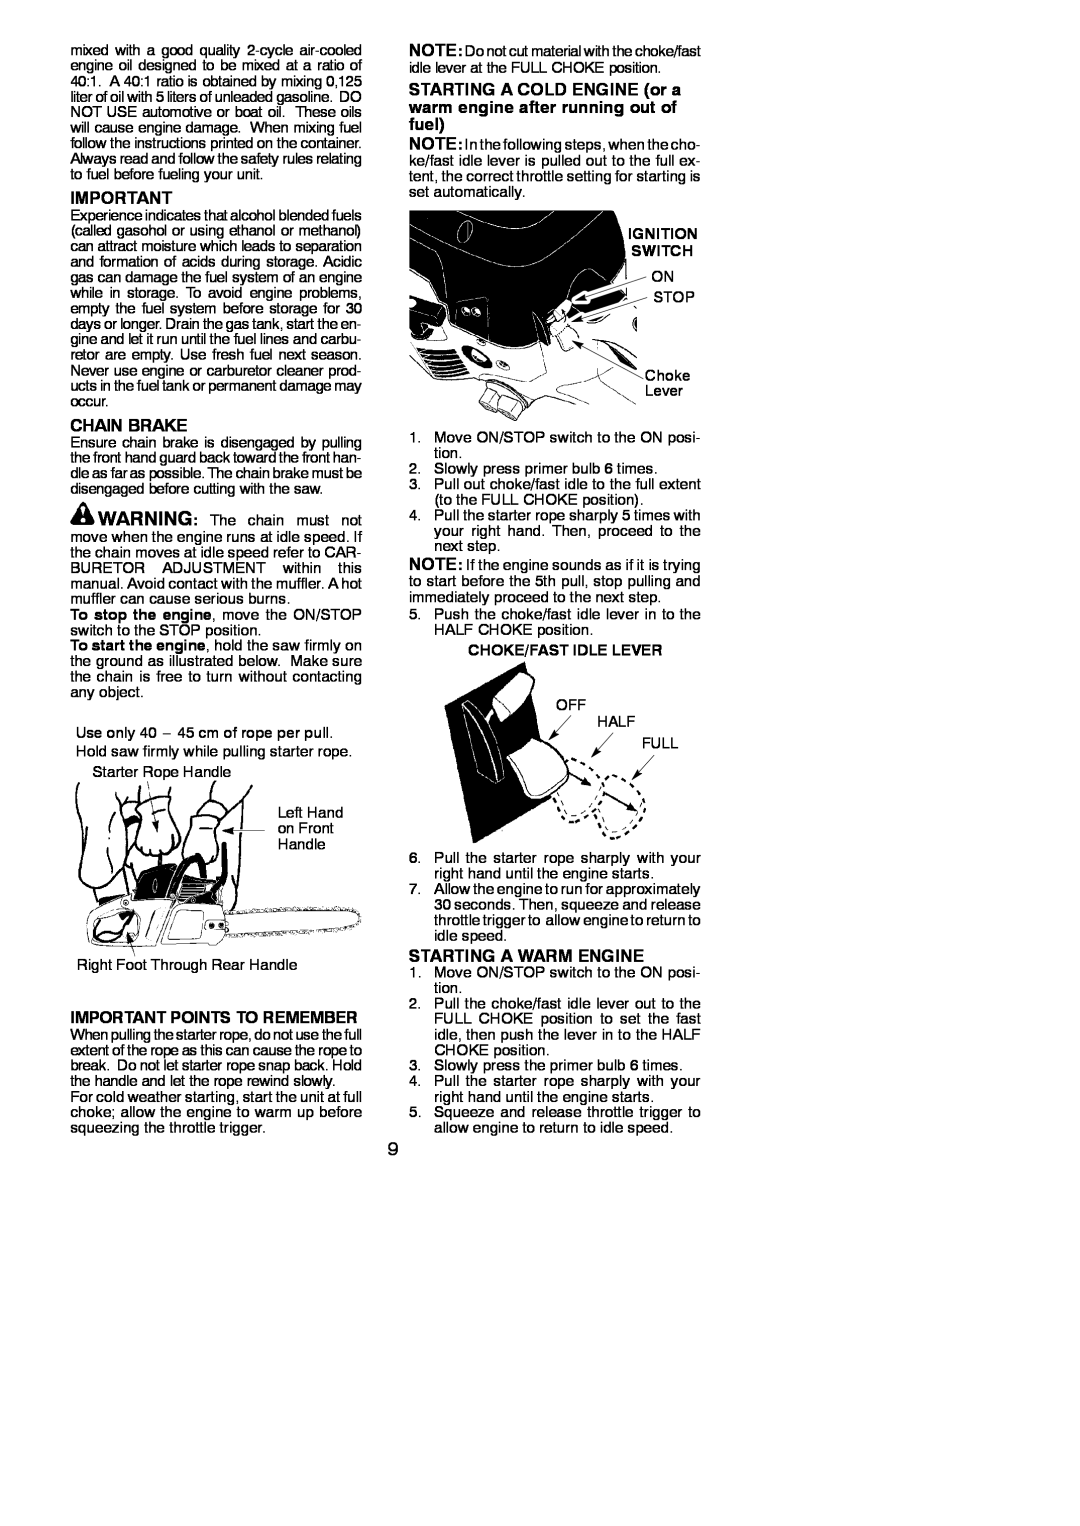 McCulloch MAC 838 instruction manual Chain Brake, Important Points To Remember, Starting A Warm Engine, Ignition Switch 